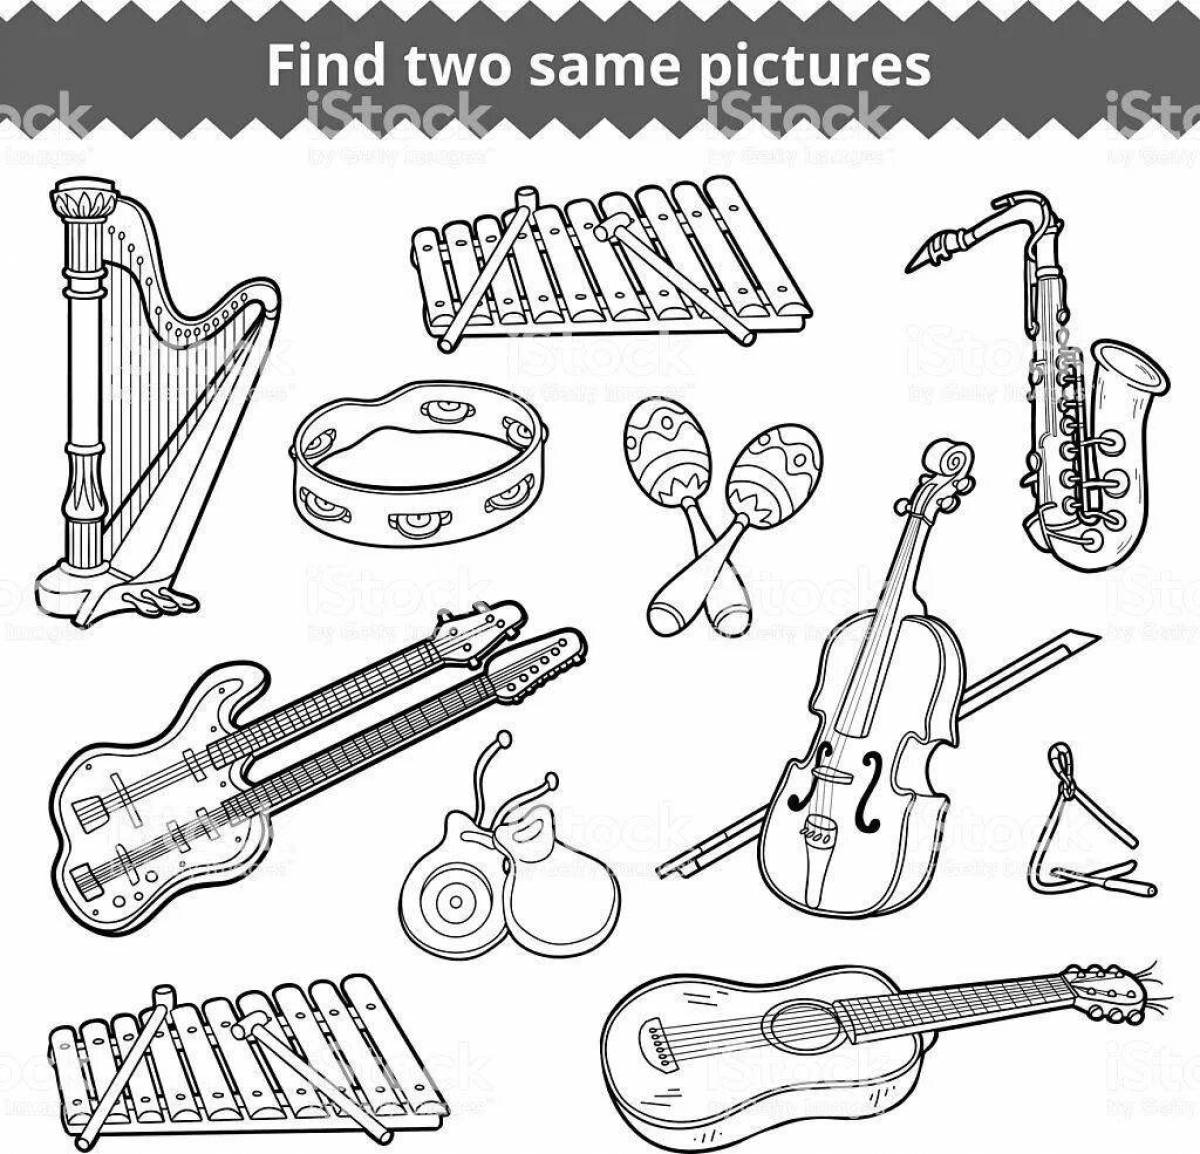 Coloring pages with playful musical instruments for preschoolers